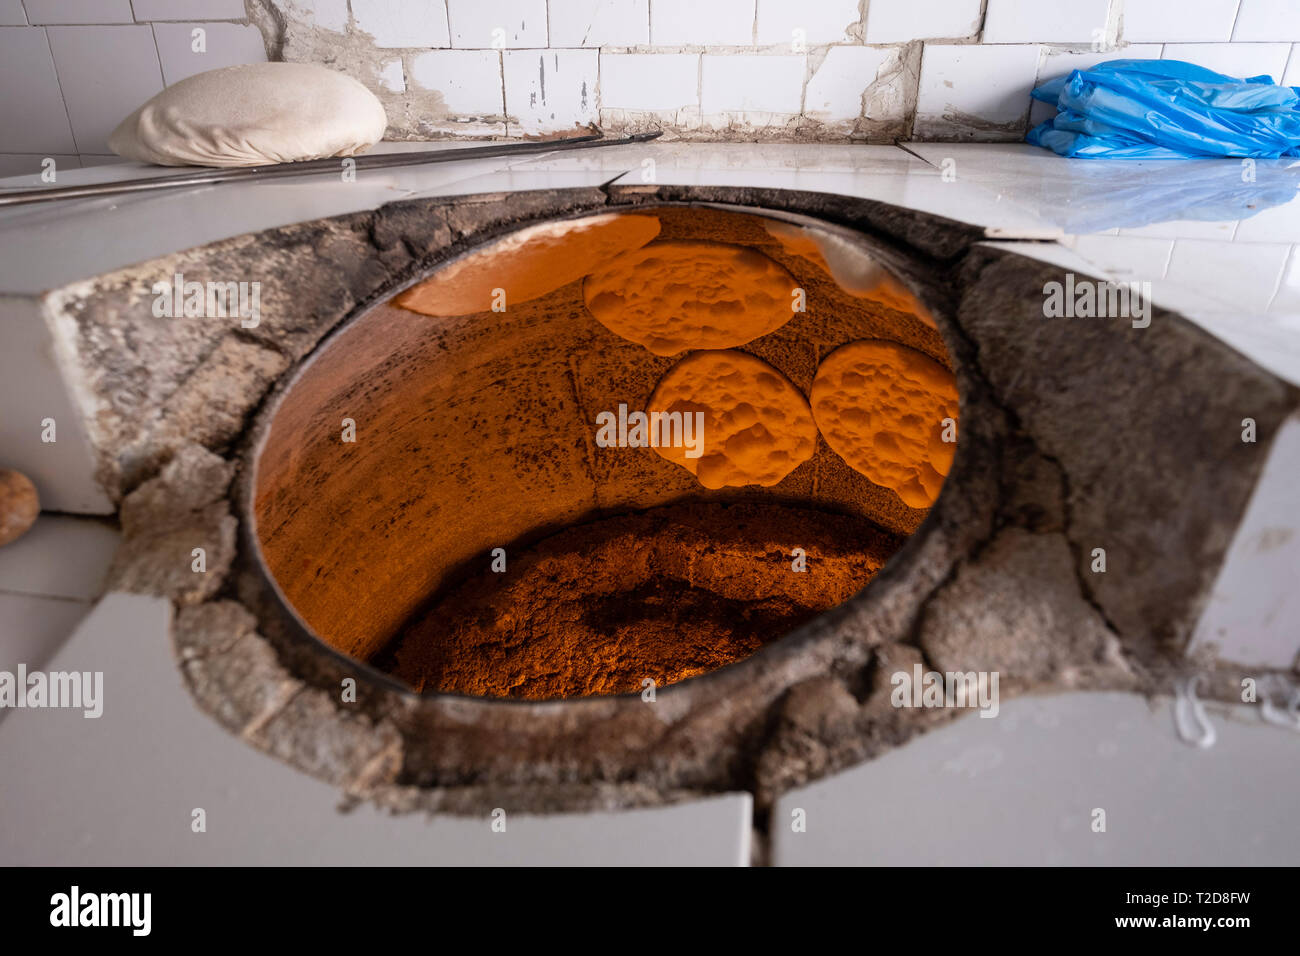 Bread being baked the arabic way on the walls of pita bread tandoor oven Stock Photo